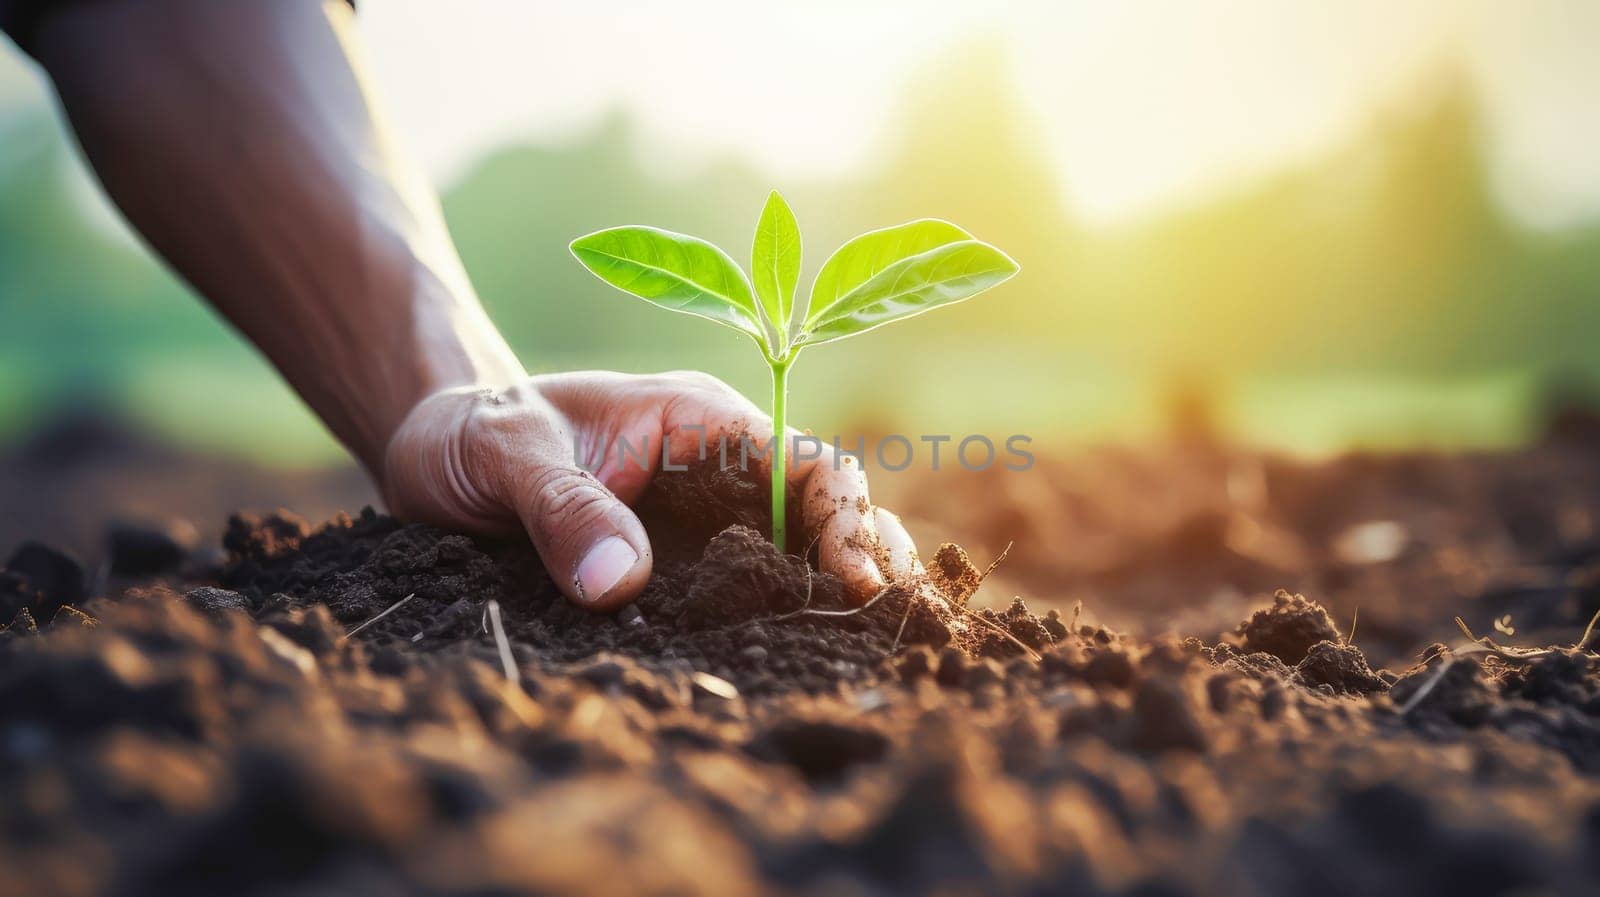 Man planting a small green plant sprout in the ground. Green energy, energy saving, caring attitude of men and women towards the environment and nature. Clean energy against